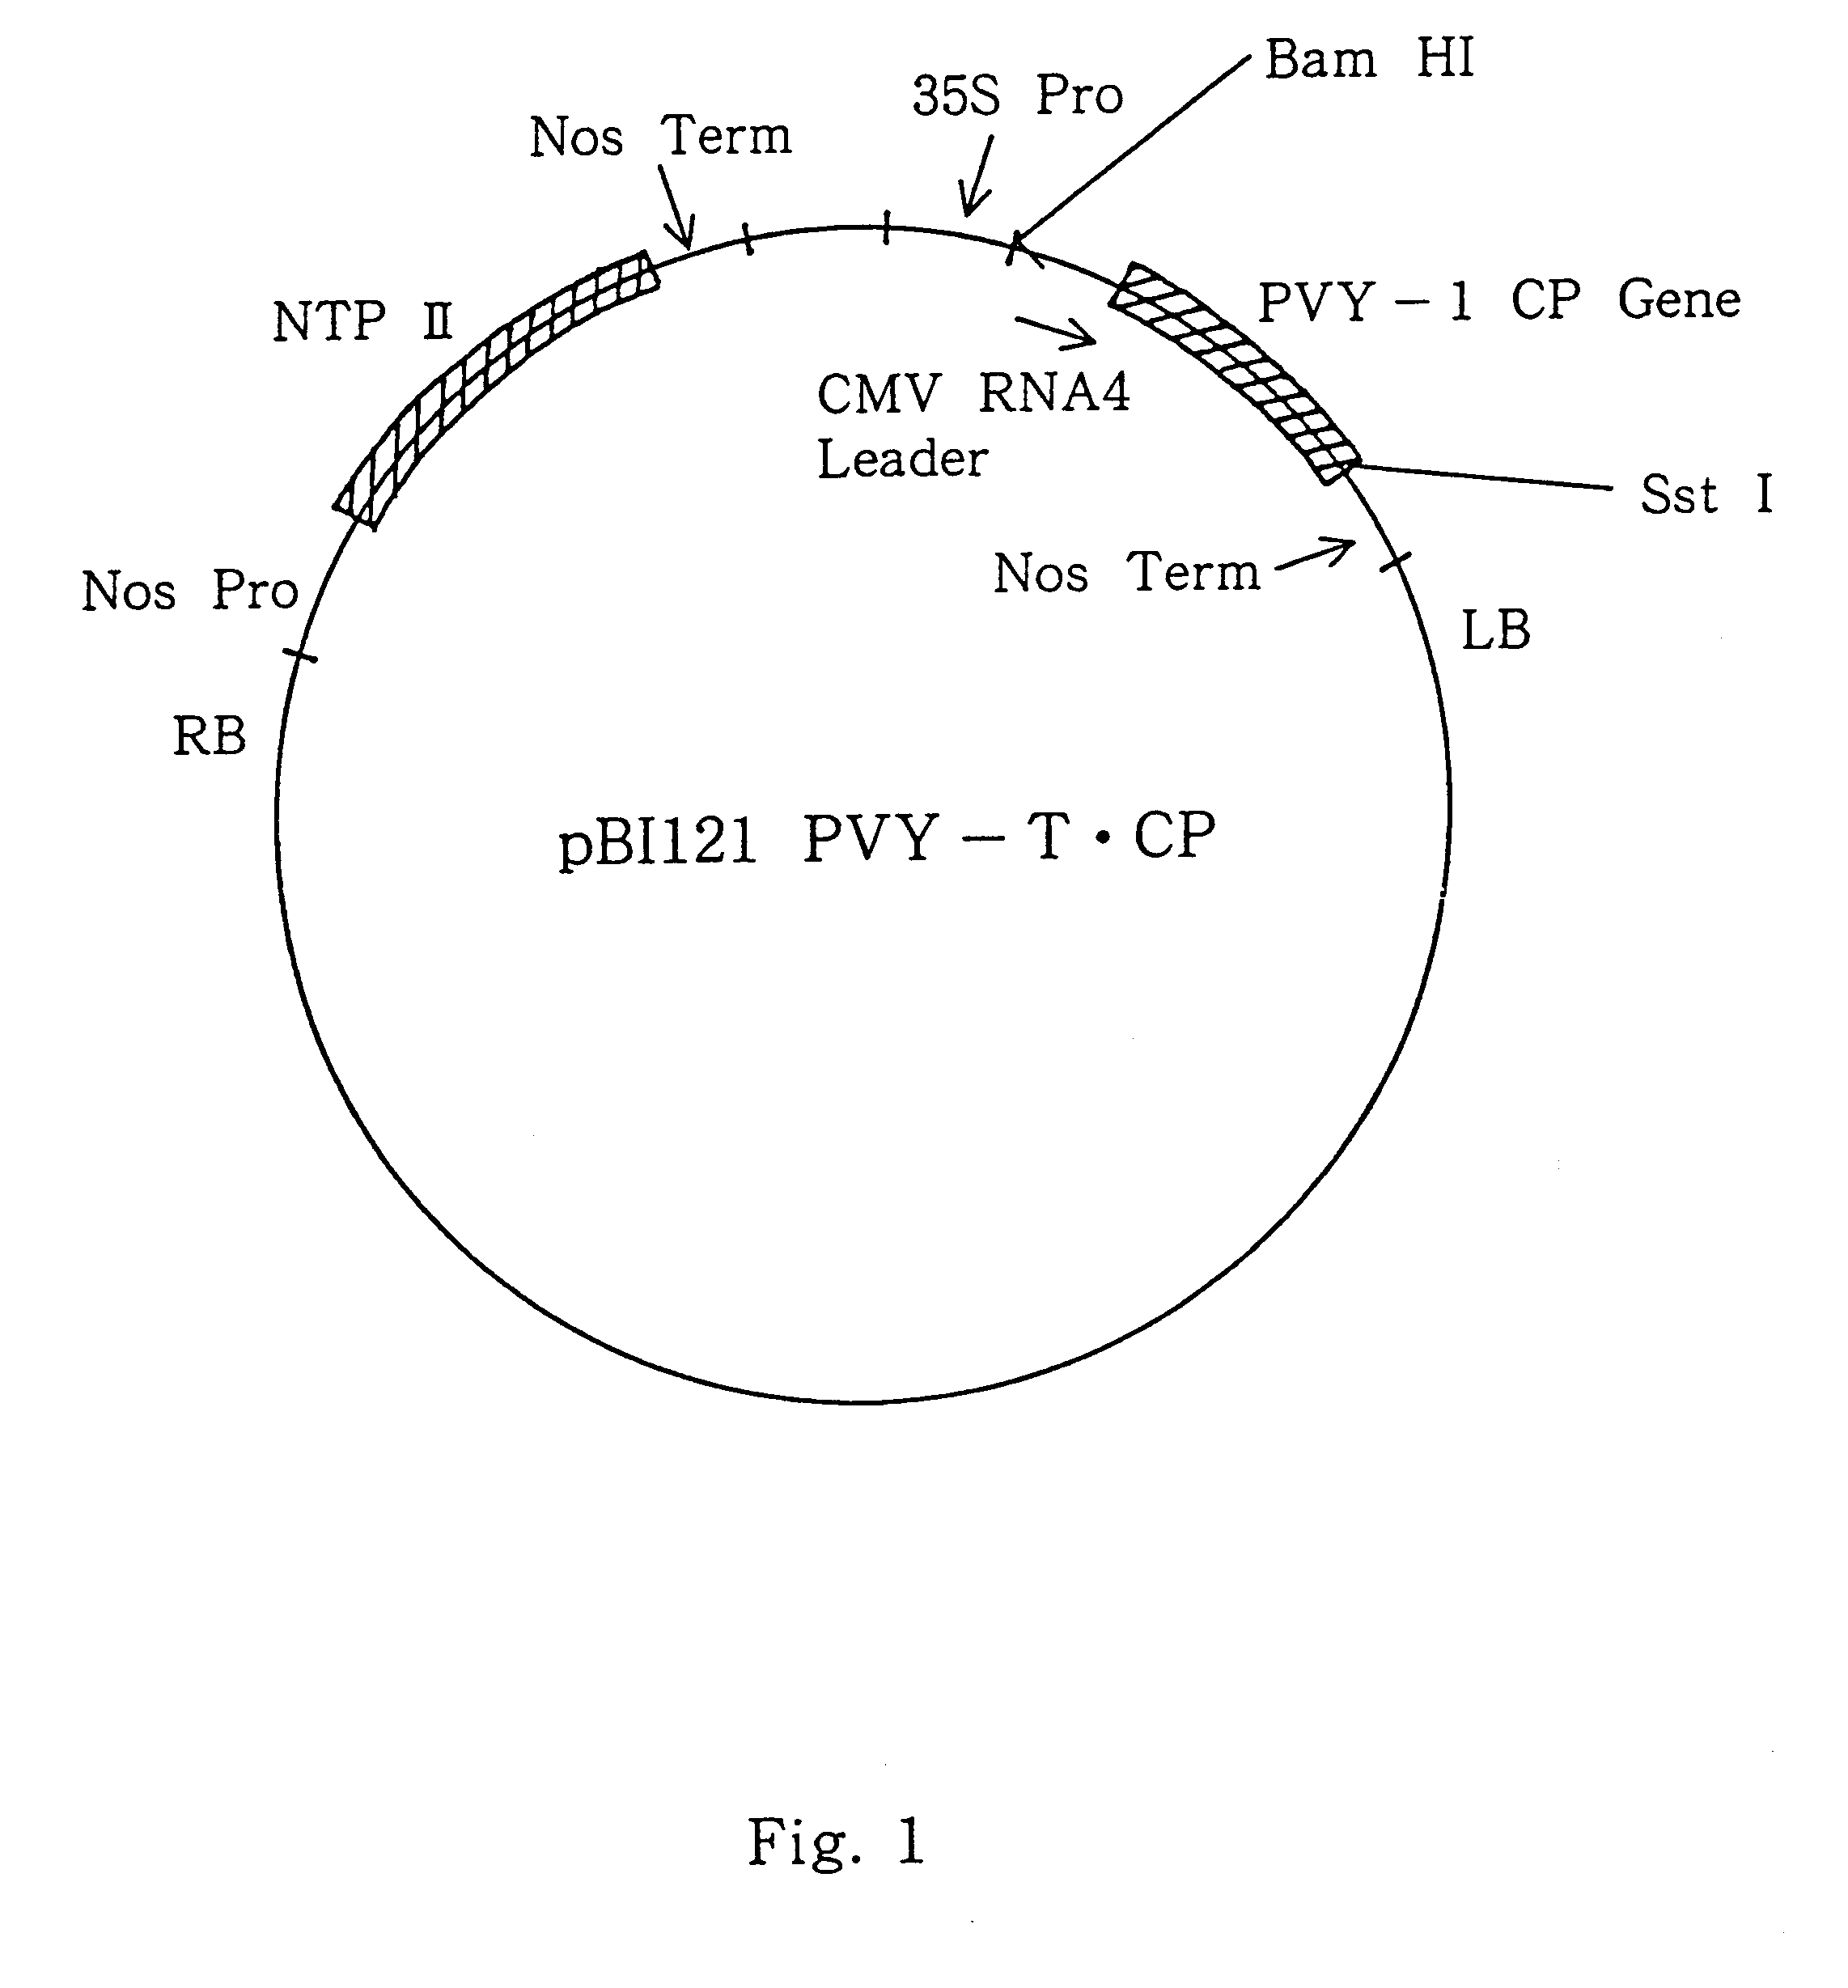 Recombinant vector, method for giving immunity against PVY-T to potato plant, and potato plant having immunity against PVY-T